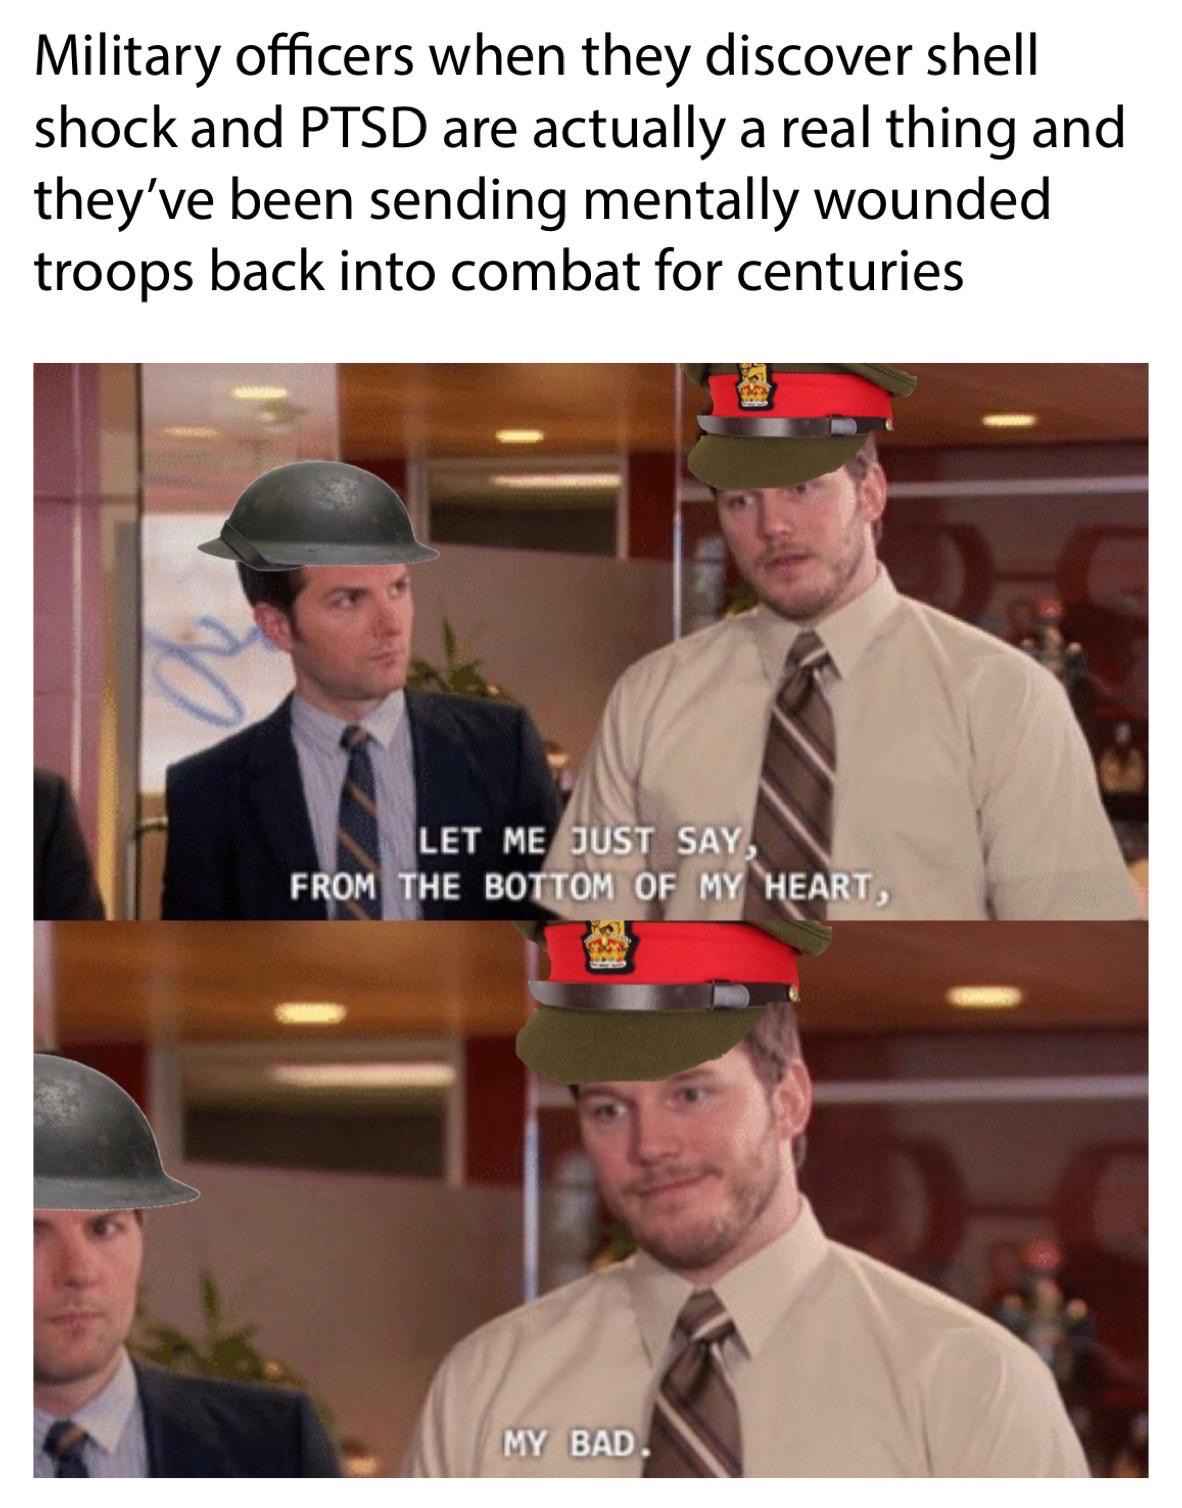 shoosh meme - Military officers when they discover shell shock and Ptsd are actually a real thing and they've been sending mentally wounded troops back into combat for centuries Let Me Just Say, From The Bottom Of My Heart, My Bad.